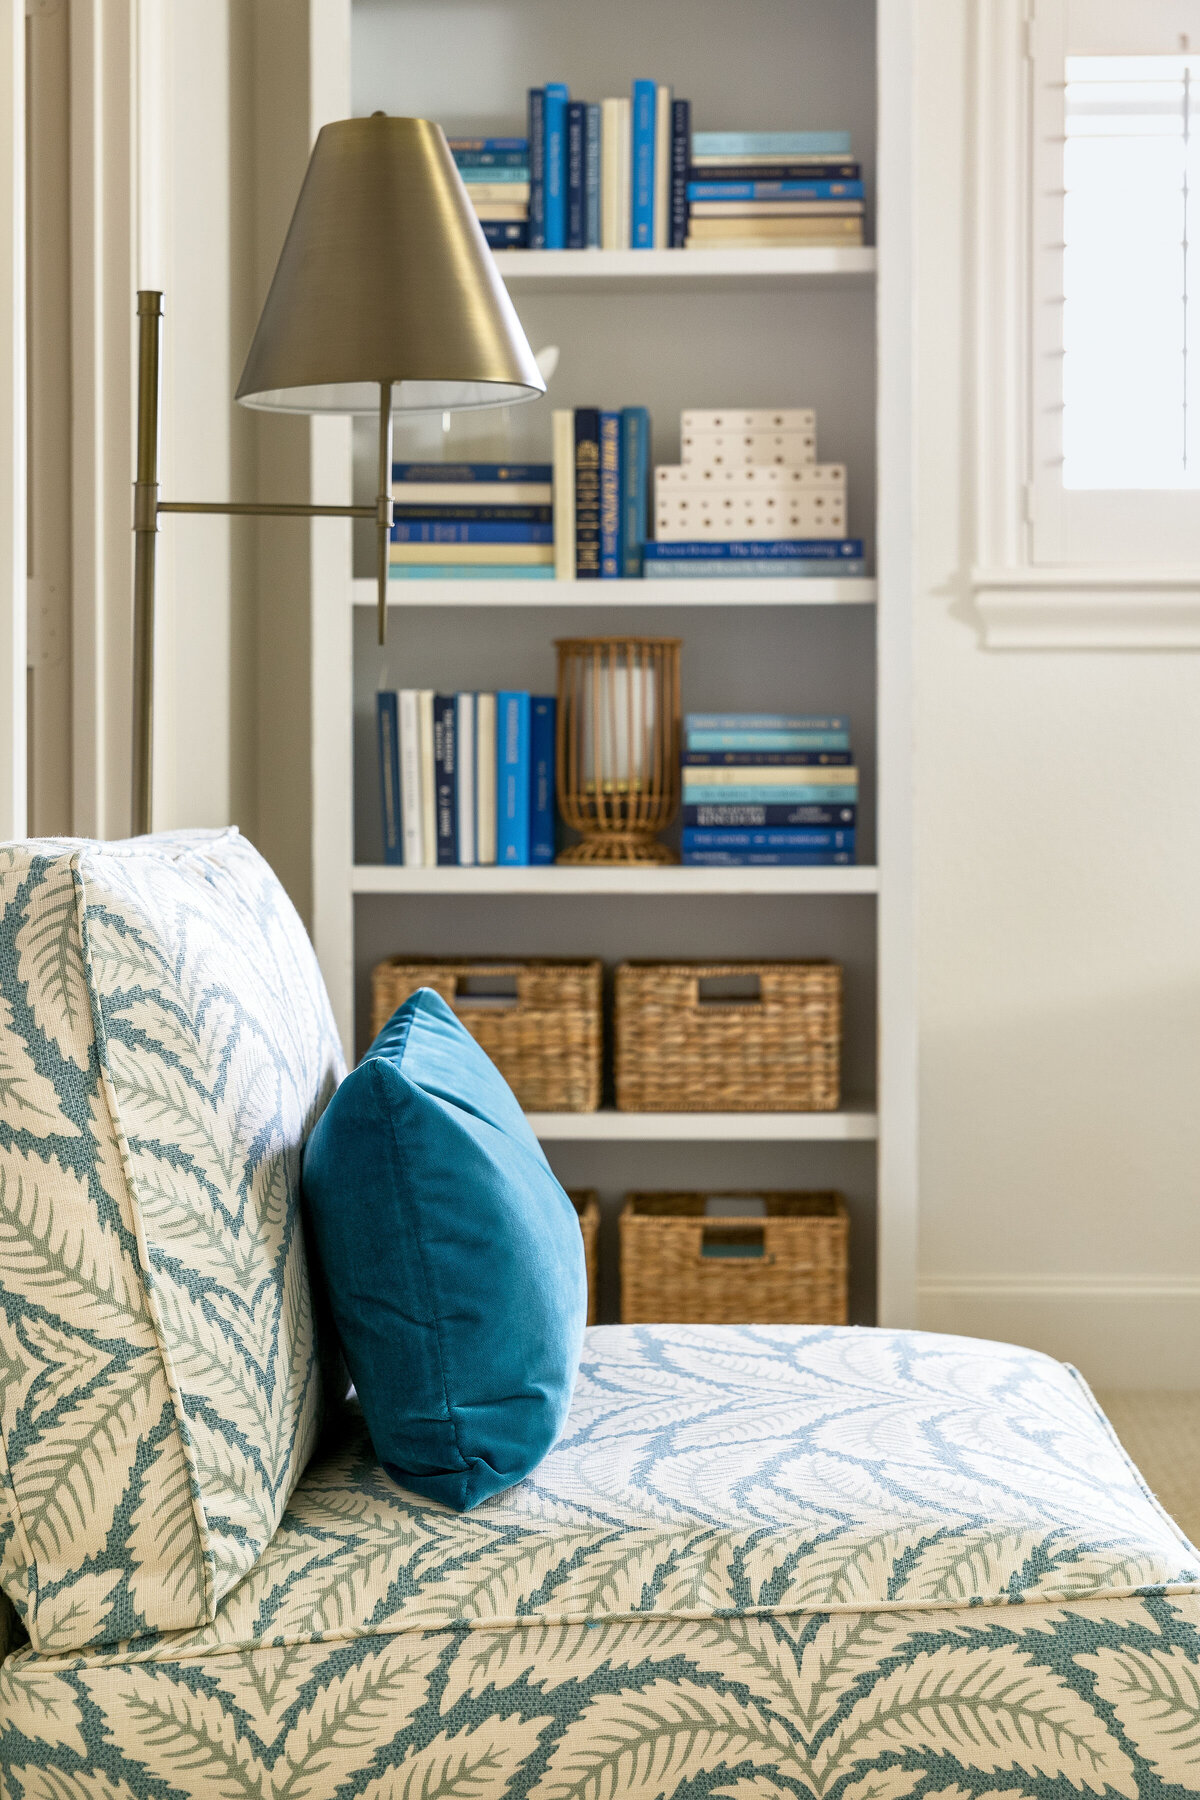 Profile shot of lounge chair with blue leaf pattern fabric  and velvet accent pillow. White bookcase accessorized with blue books, rattan hurricanes, and woven baskets